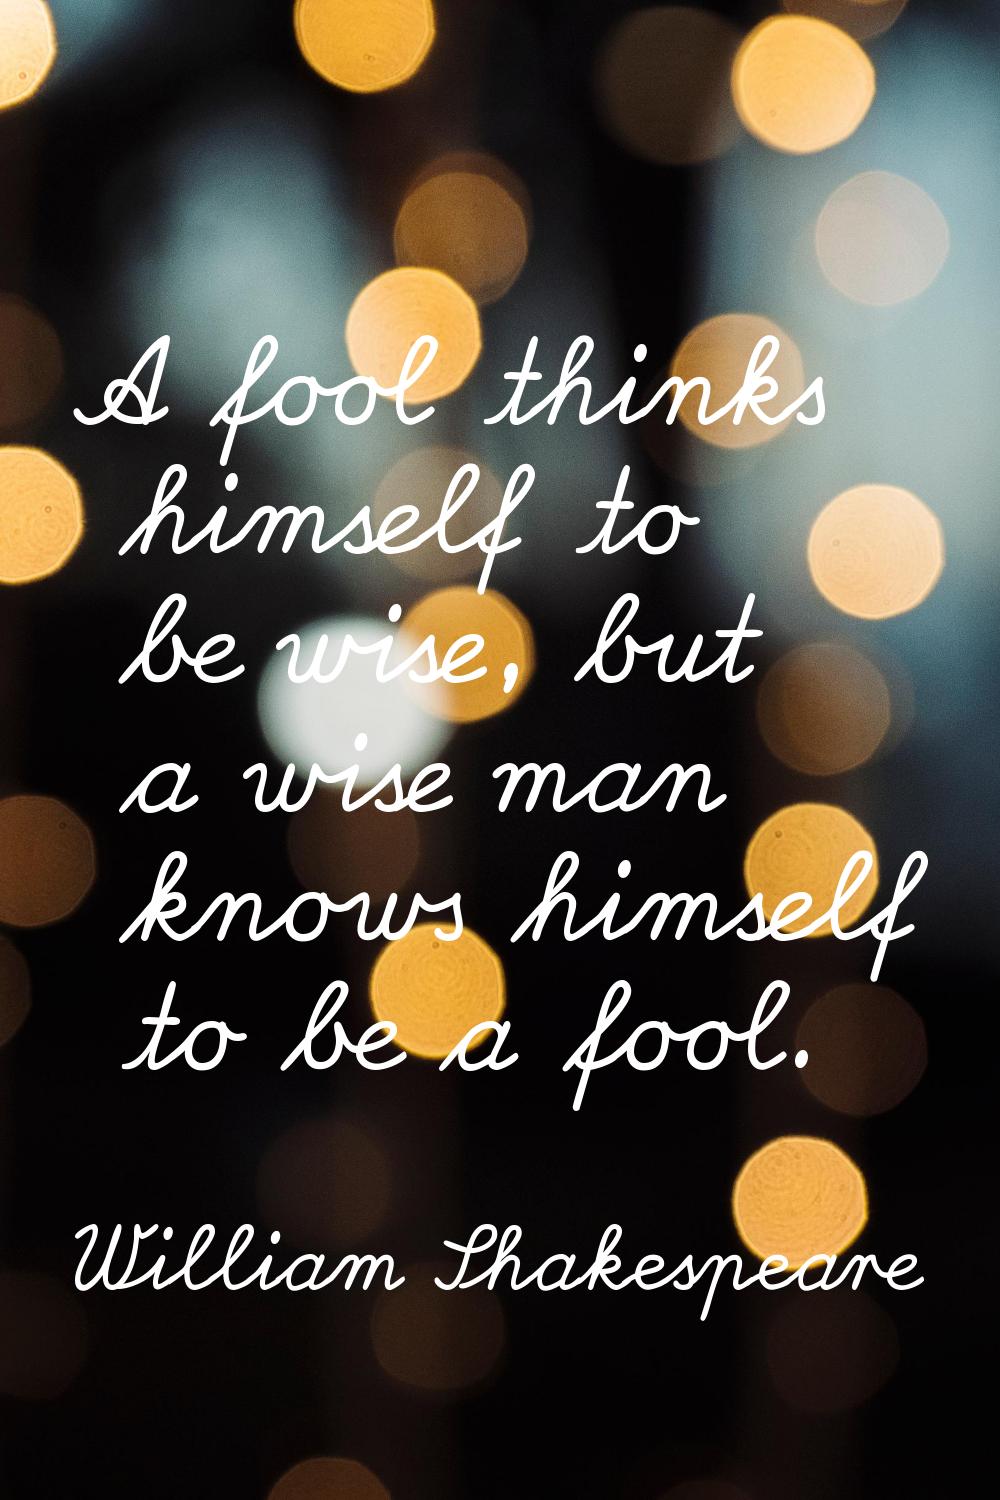 A fool thinks himself to be wise, but a wise man knows himself to be a fool.